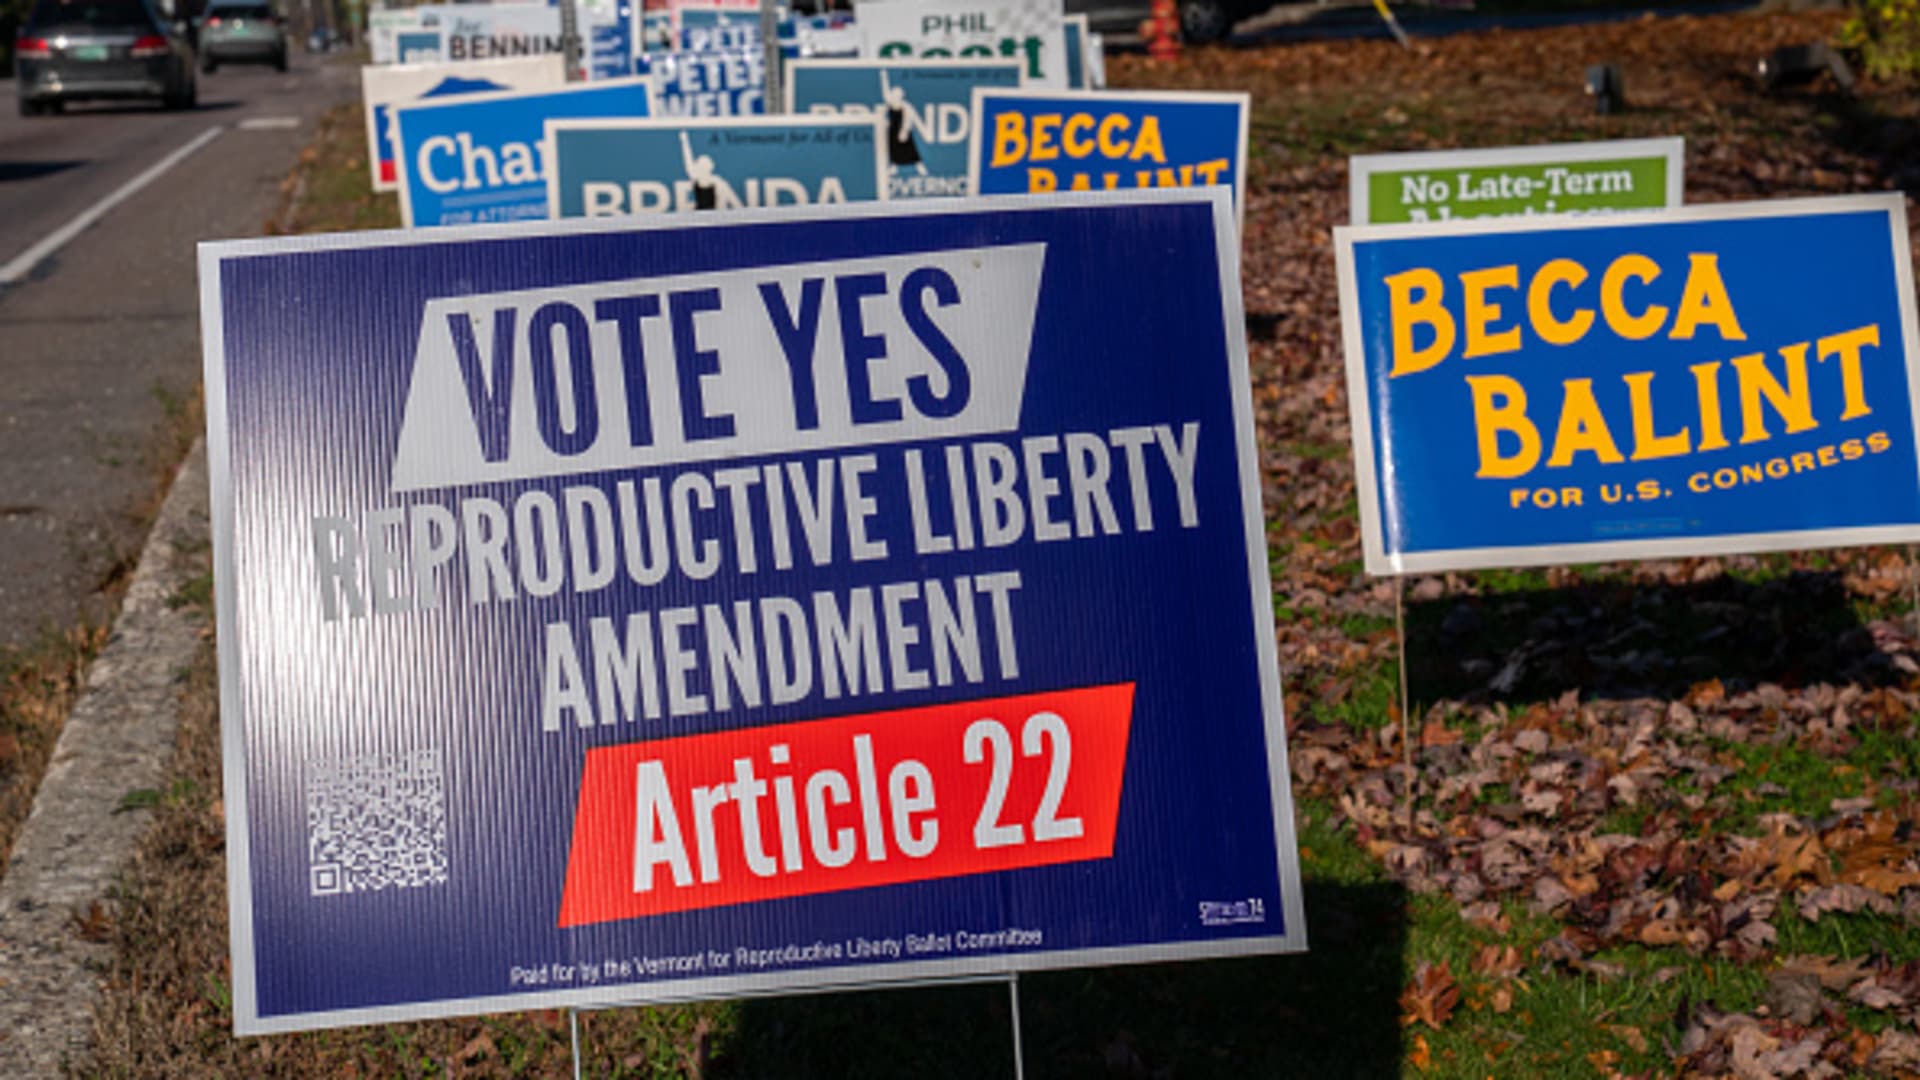 Political candidate and referendum posters are placed along a main road November 2, 2022 in Shelburne, Vermont. A sign in favor Article 27 would enshrine a woman's reproductive rights in the Vermont state constitution following the US Supreme Court's declaring Roe v. Wade as unconstitutional after 50 years of abortion rights. US midterm elections will be held on November 8, 2022.